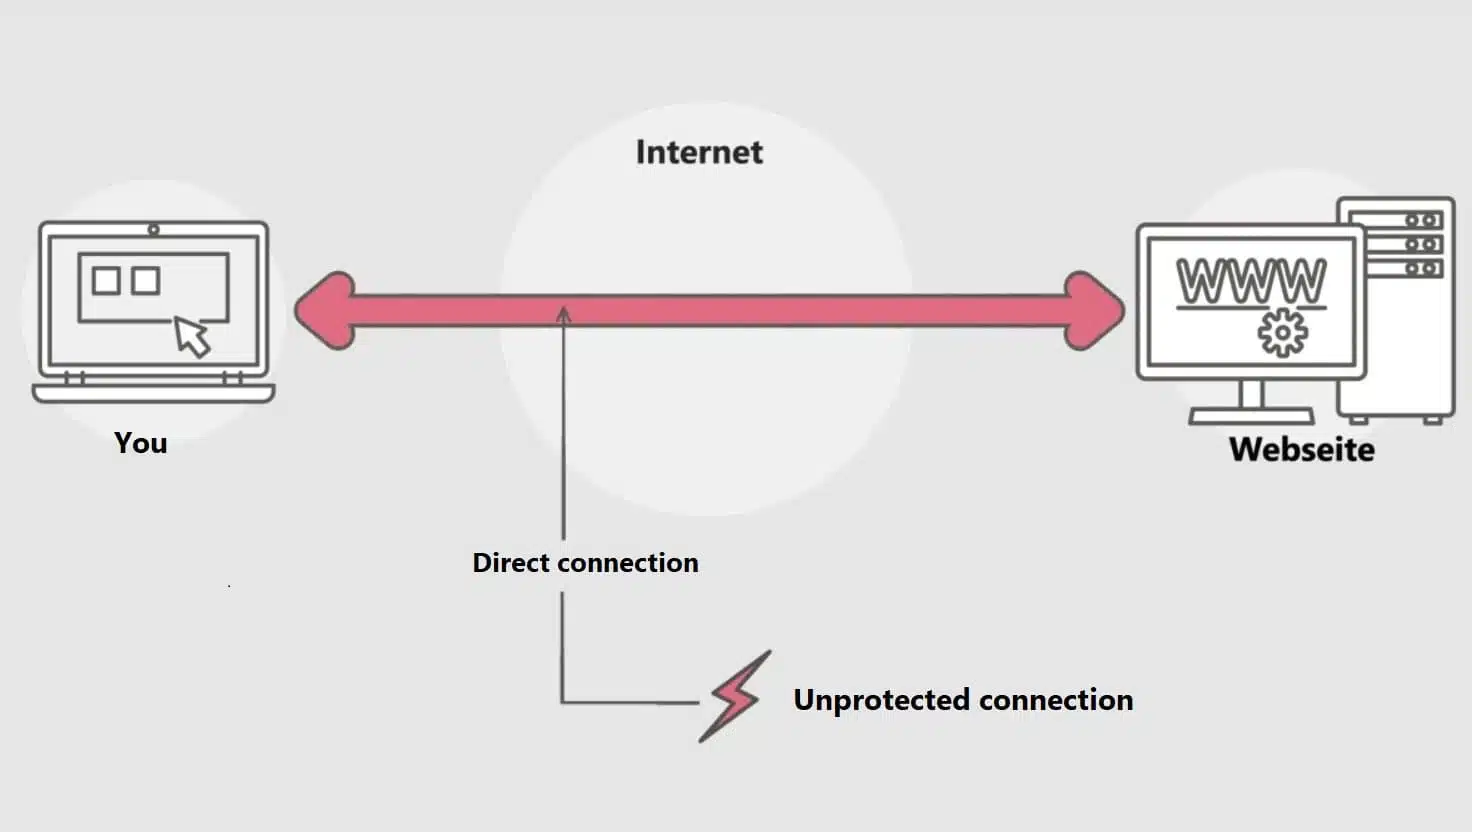 Normal internet connection